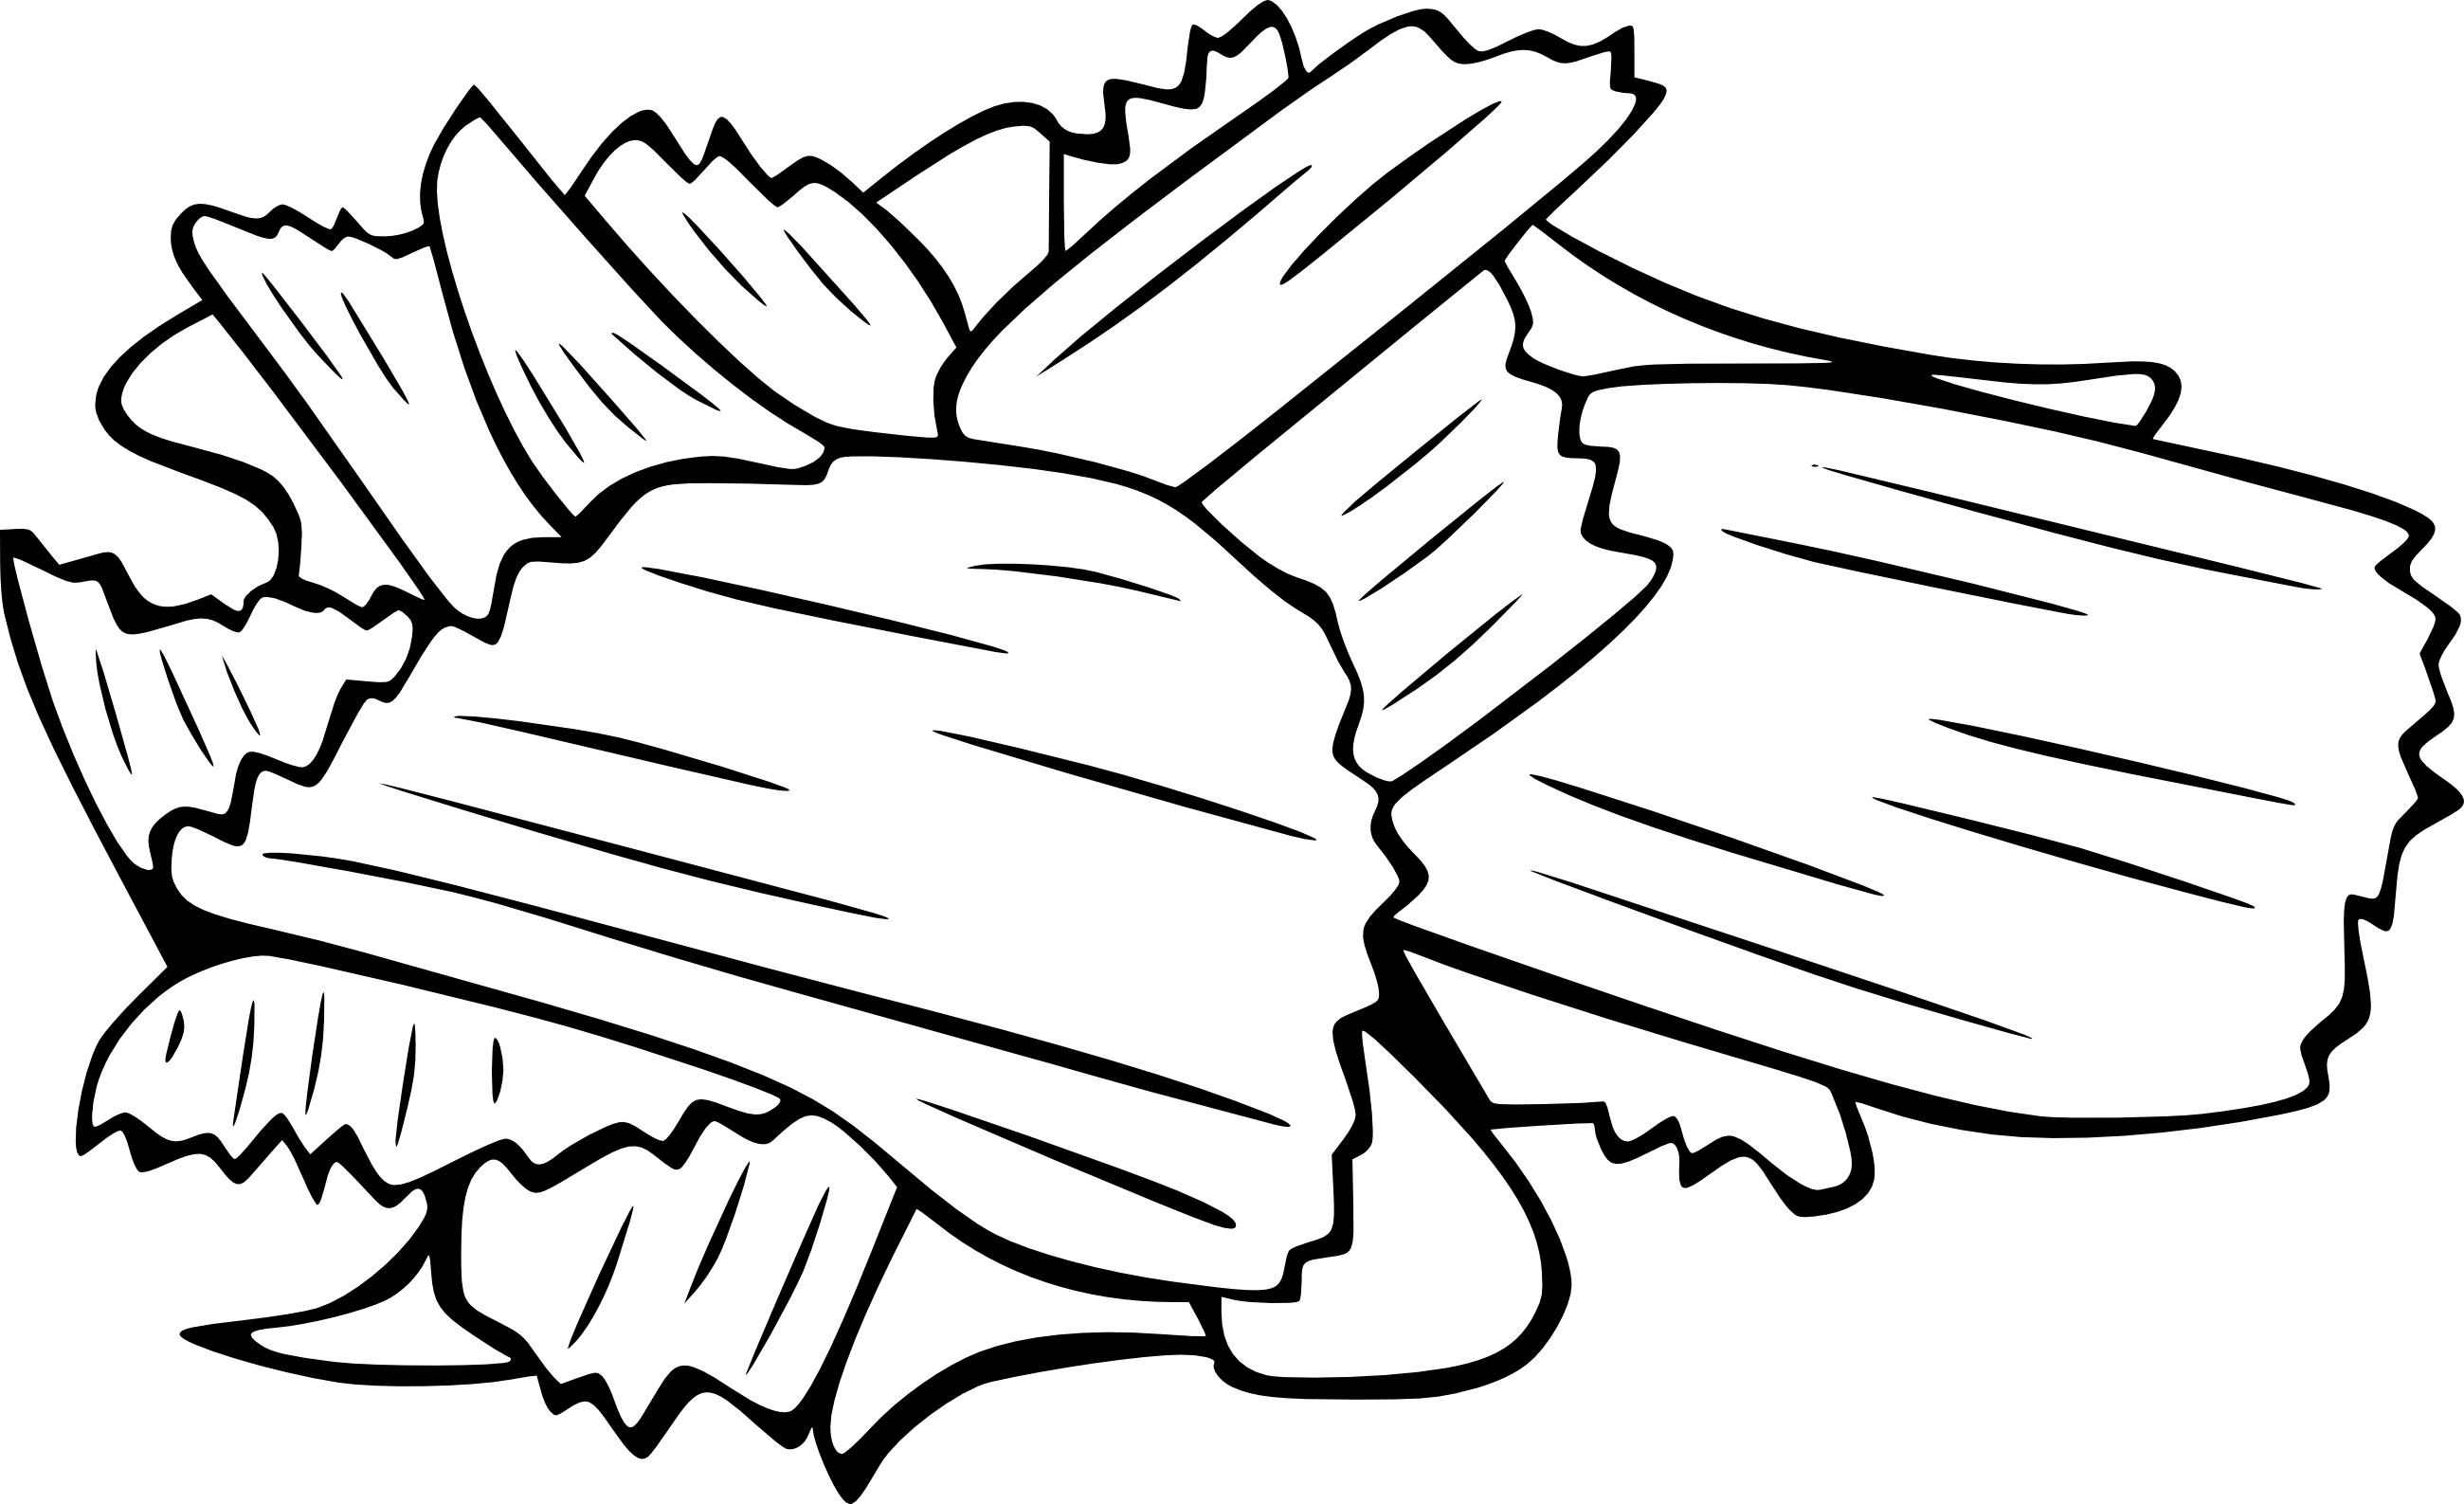 Chips coloring page